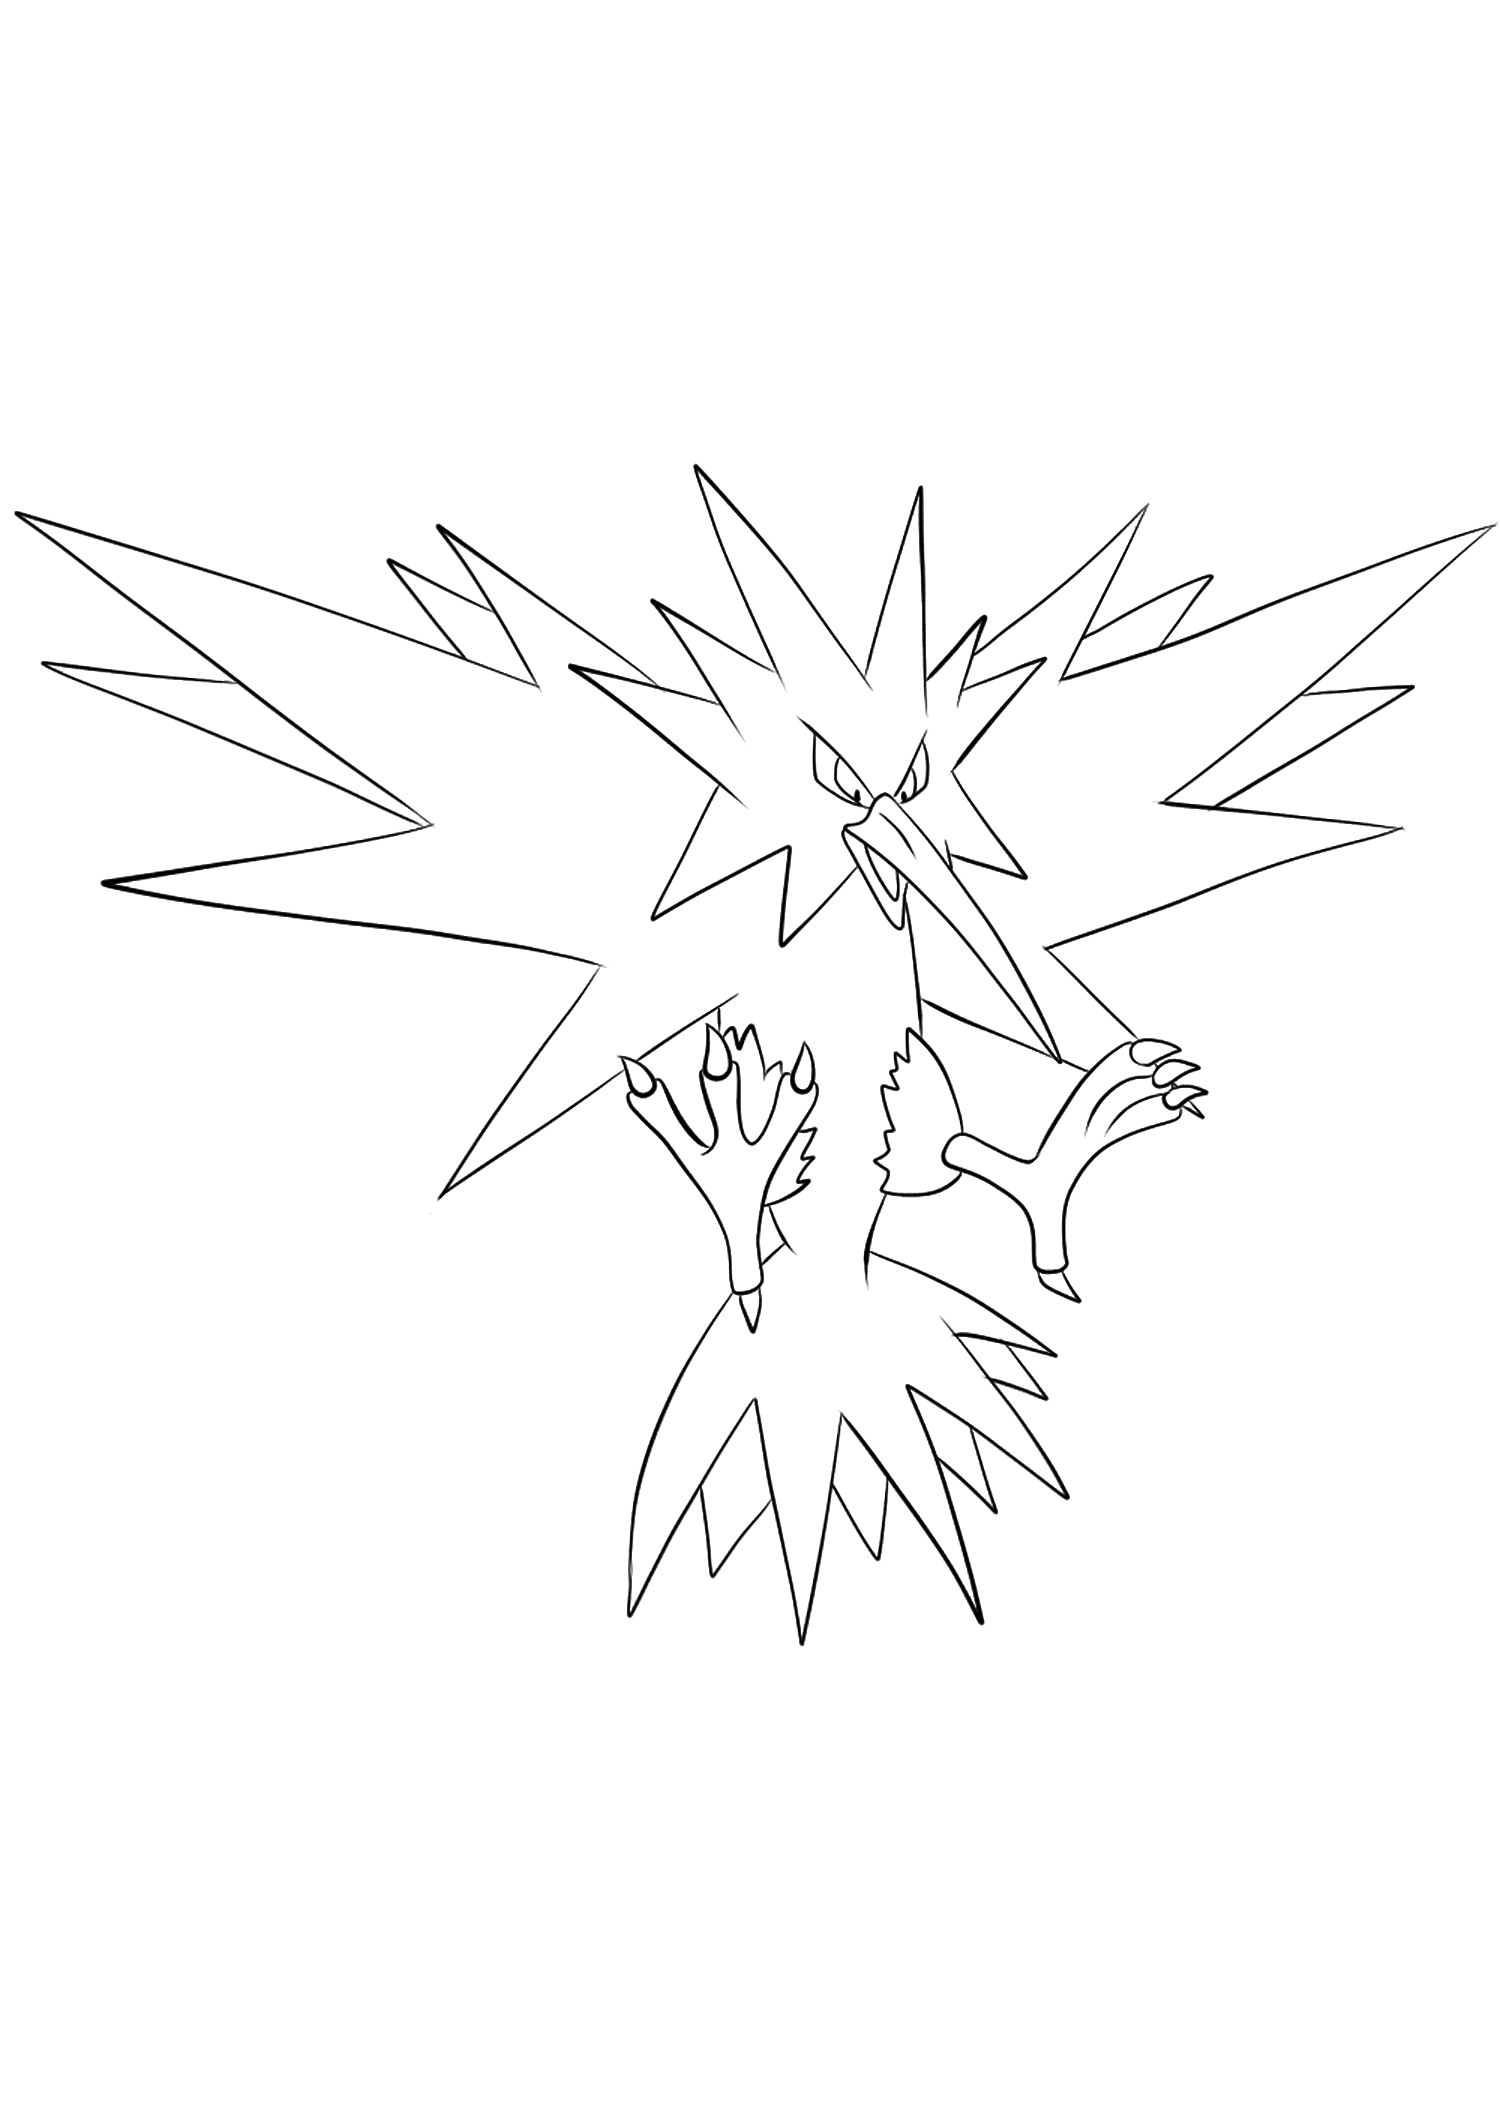 Zapdos (No.145). Zapdos Coloring page, Generation I Pokemon of type Electrik and FlyingOriginal image credit: Pokemon linearts by Lilly Gerbil on Deviantart.Permission:  All rights reserved © Pokemon company and Ken Sugimori.